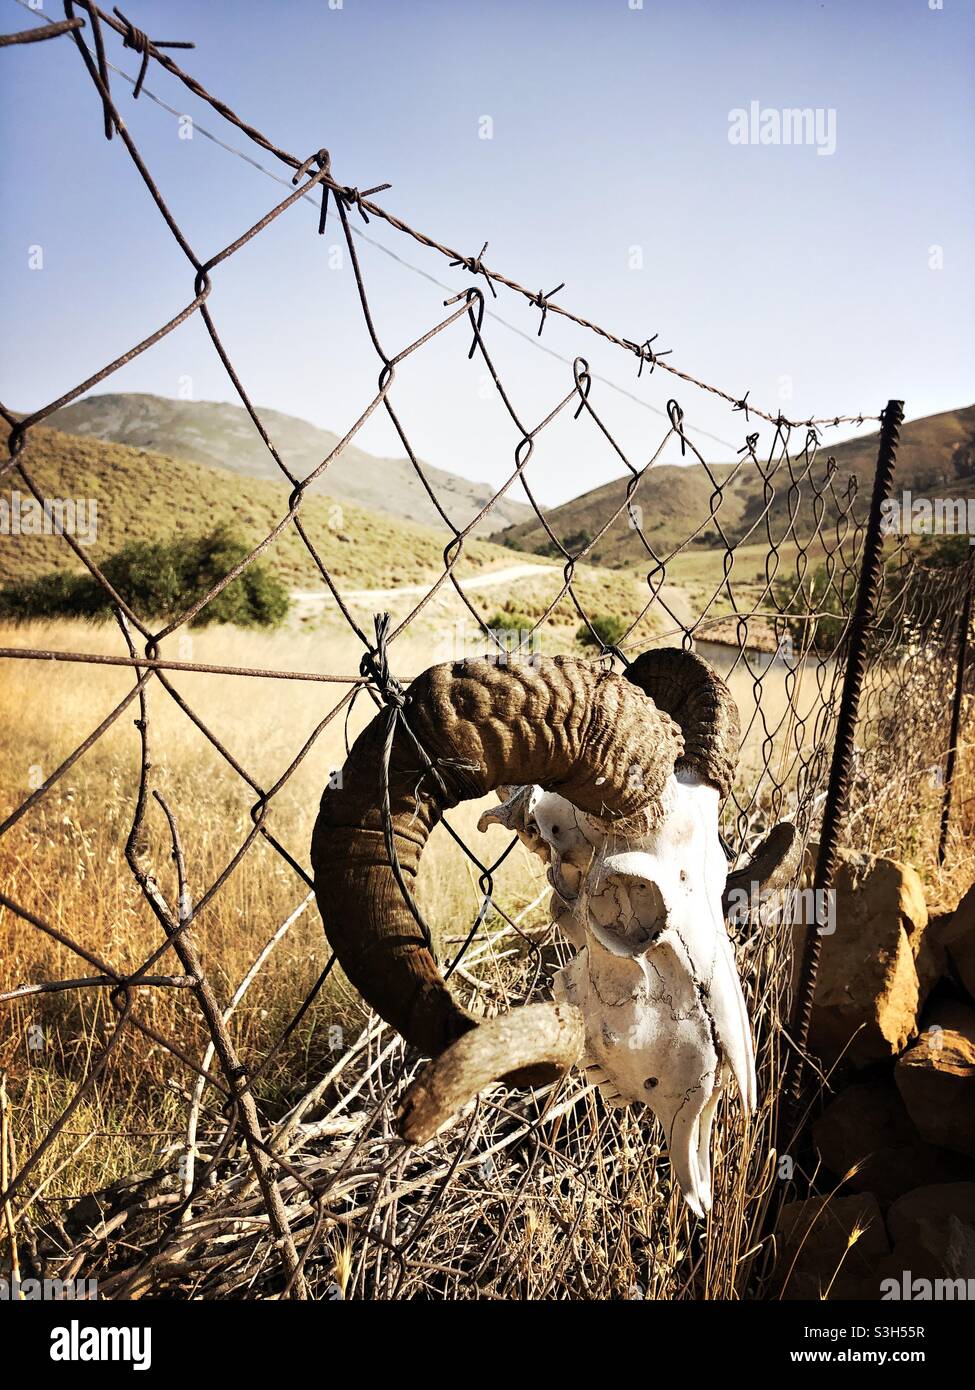 Skull of a goat hanging on a fence in a rural area Stock Photo - Alamy